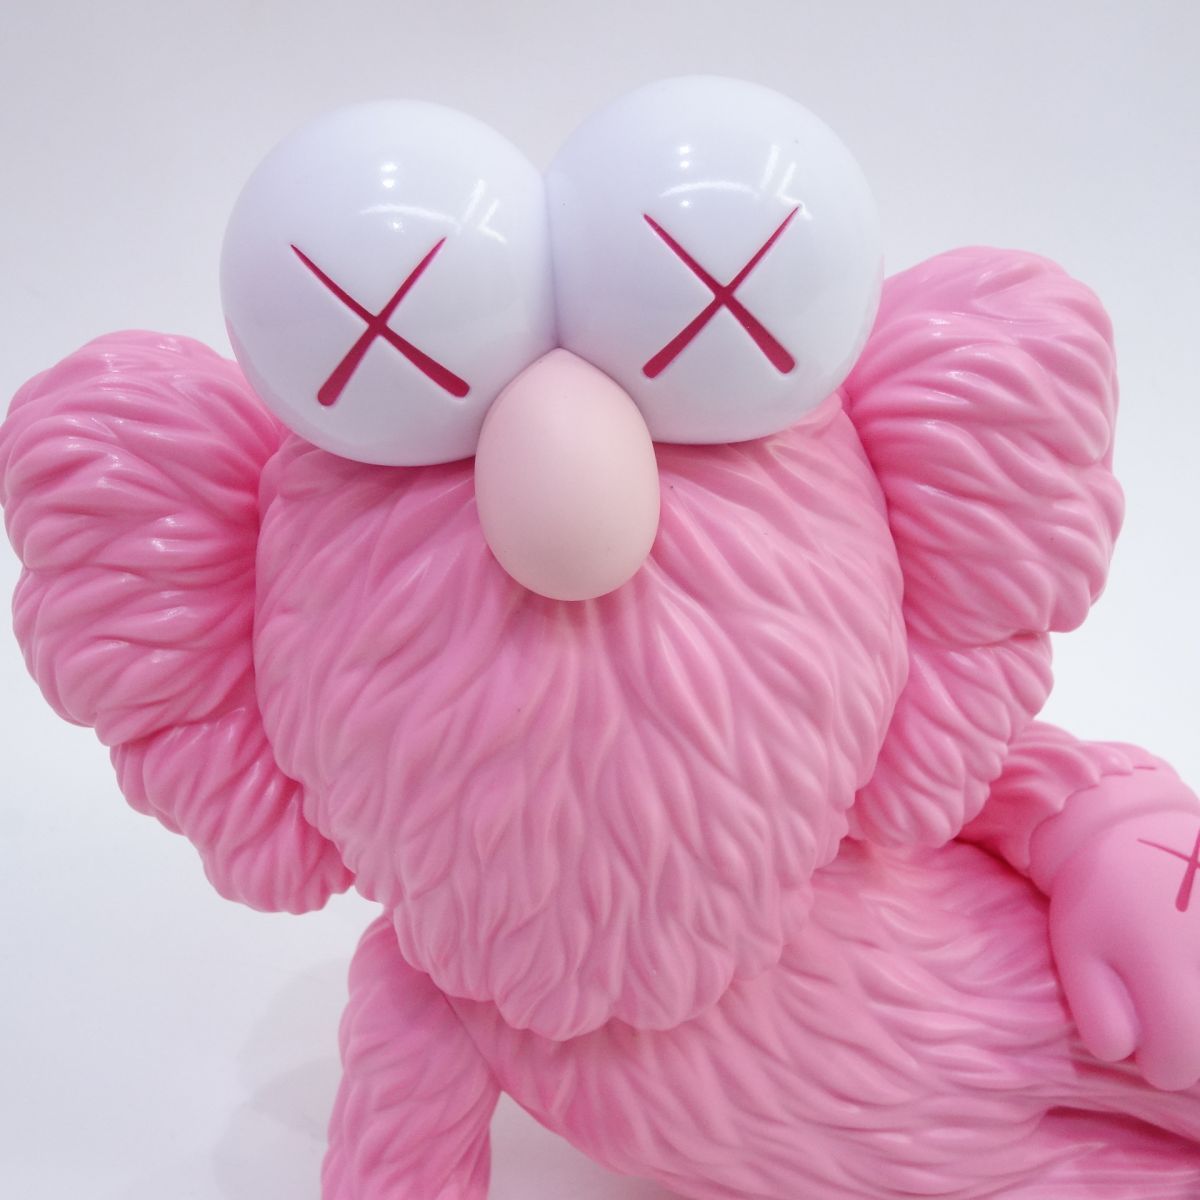 KAWS time off pink medicom toy カウズ - その他